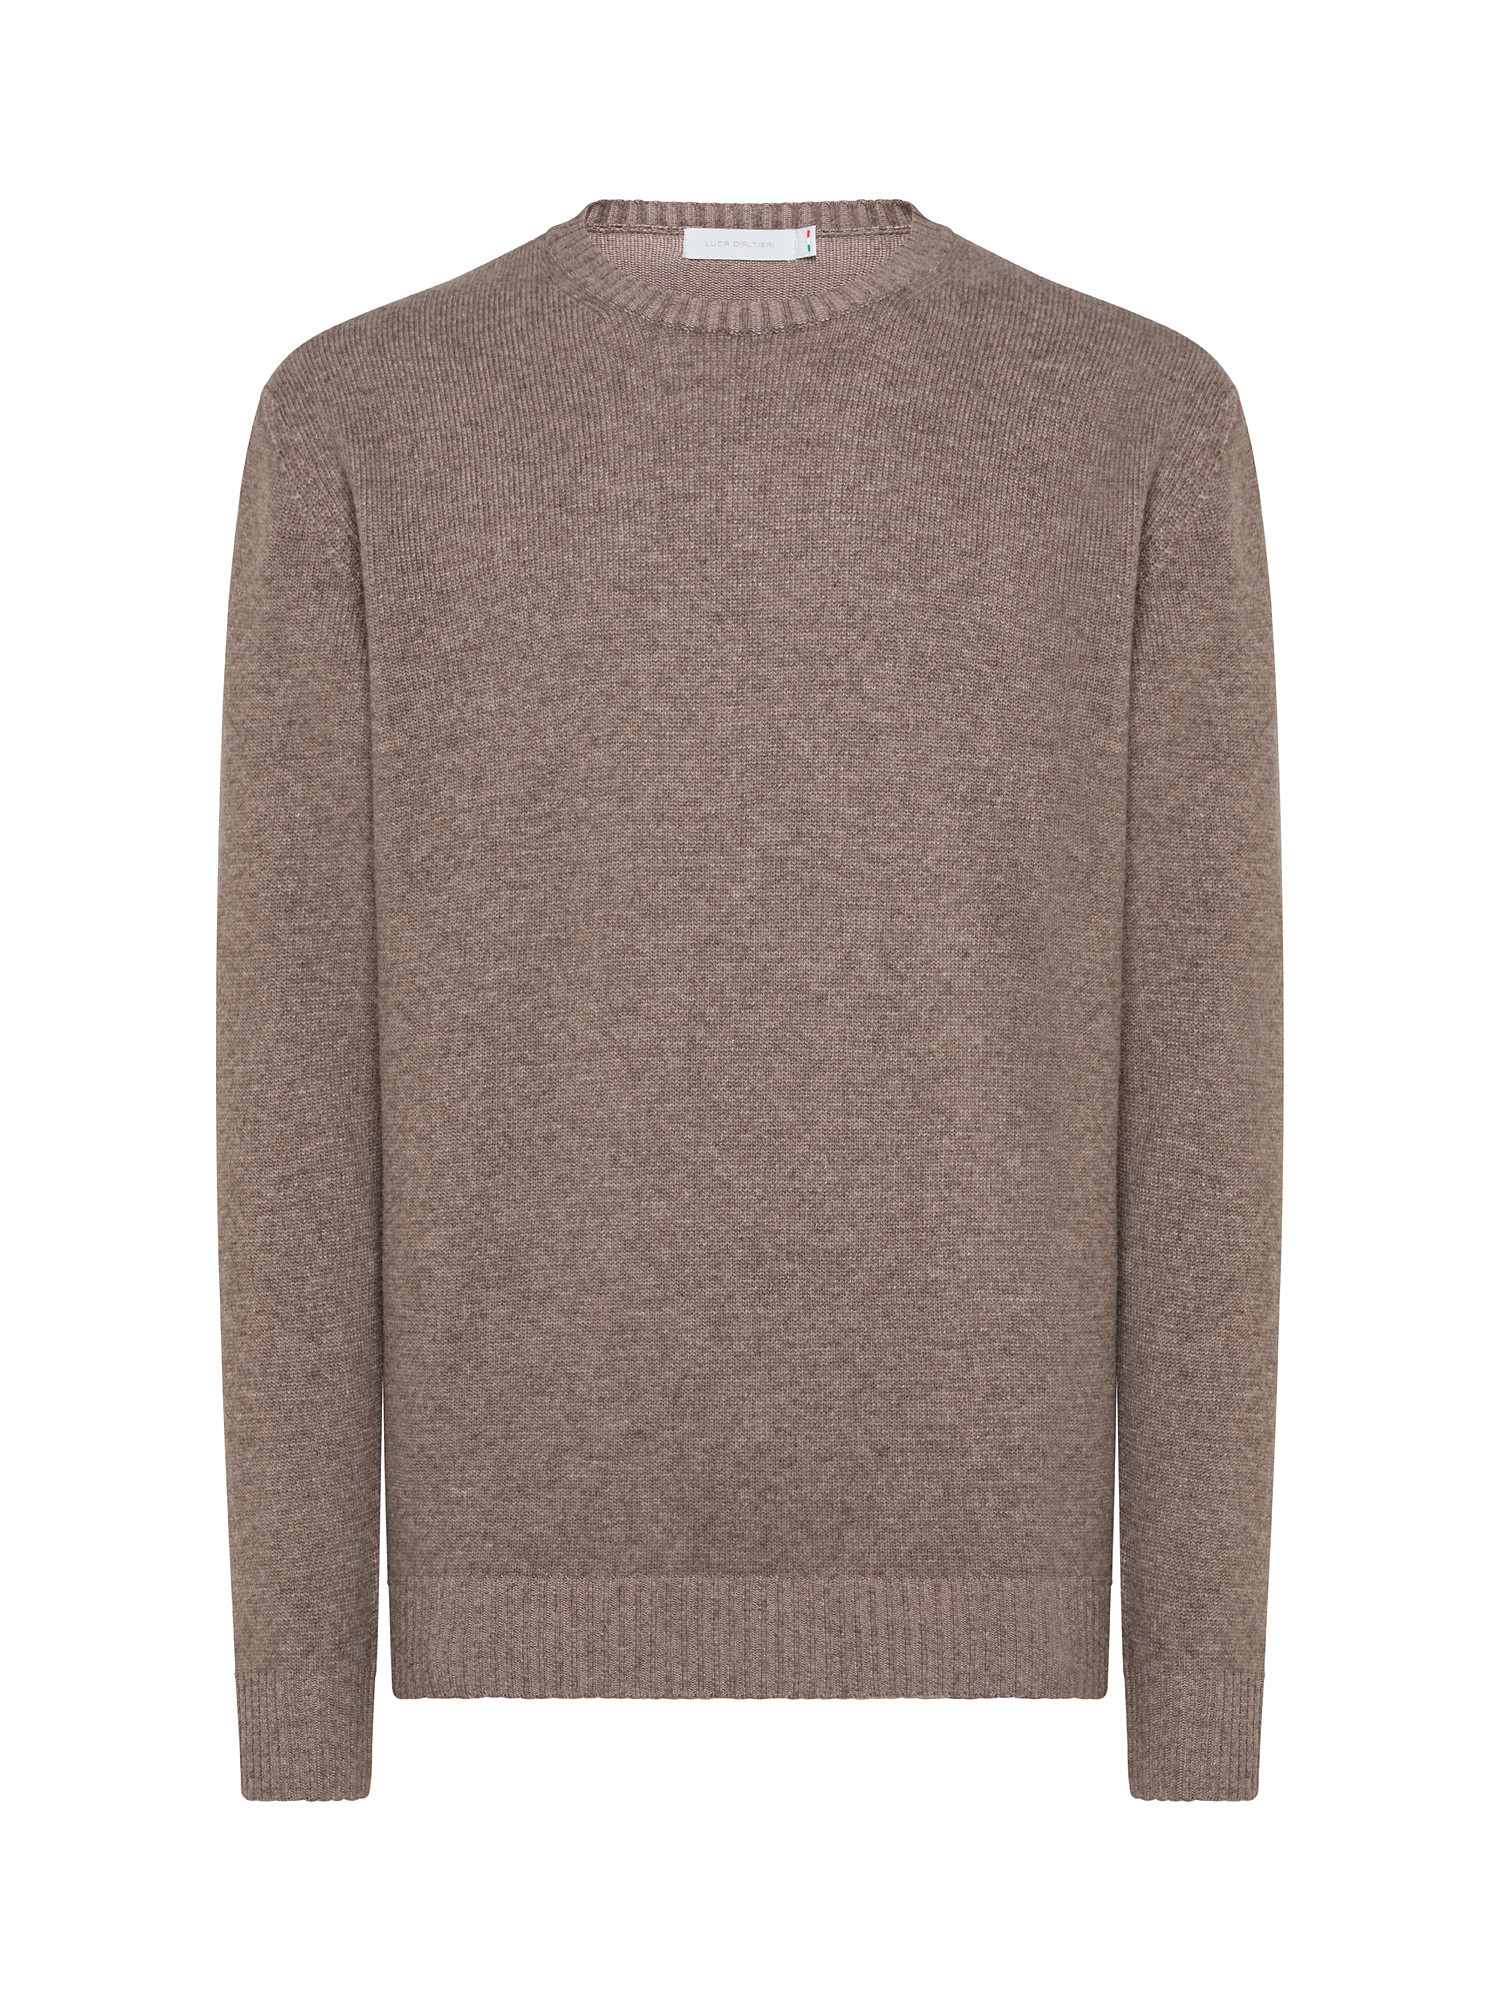 Pullover girocollo, Beige, large image number 0